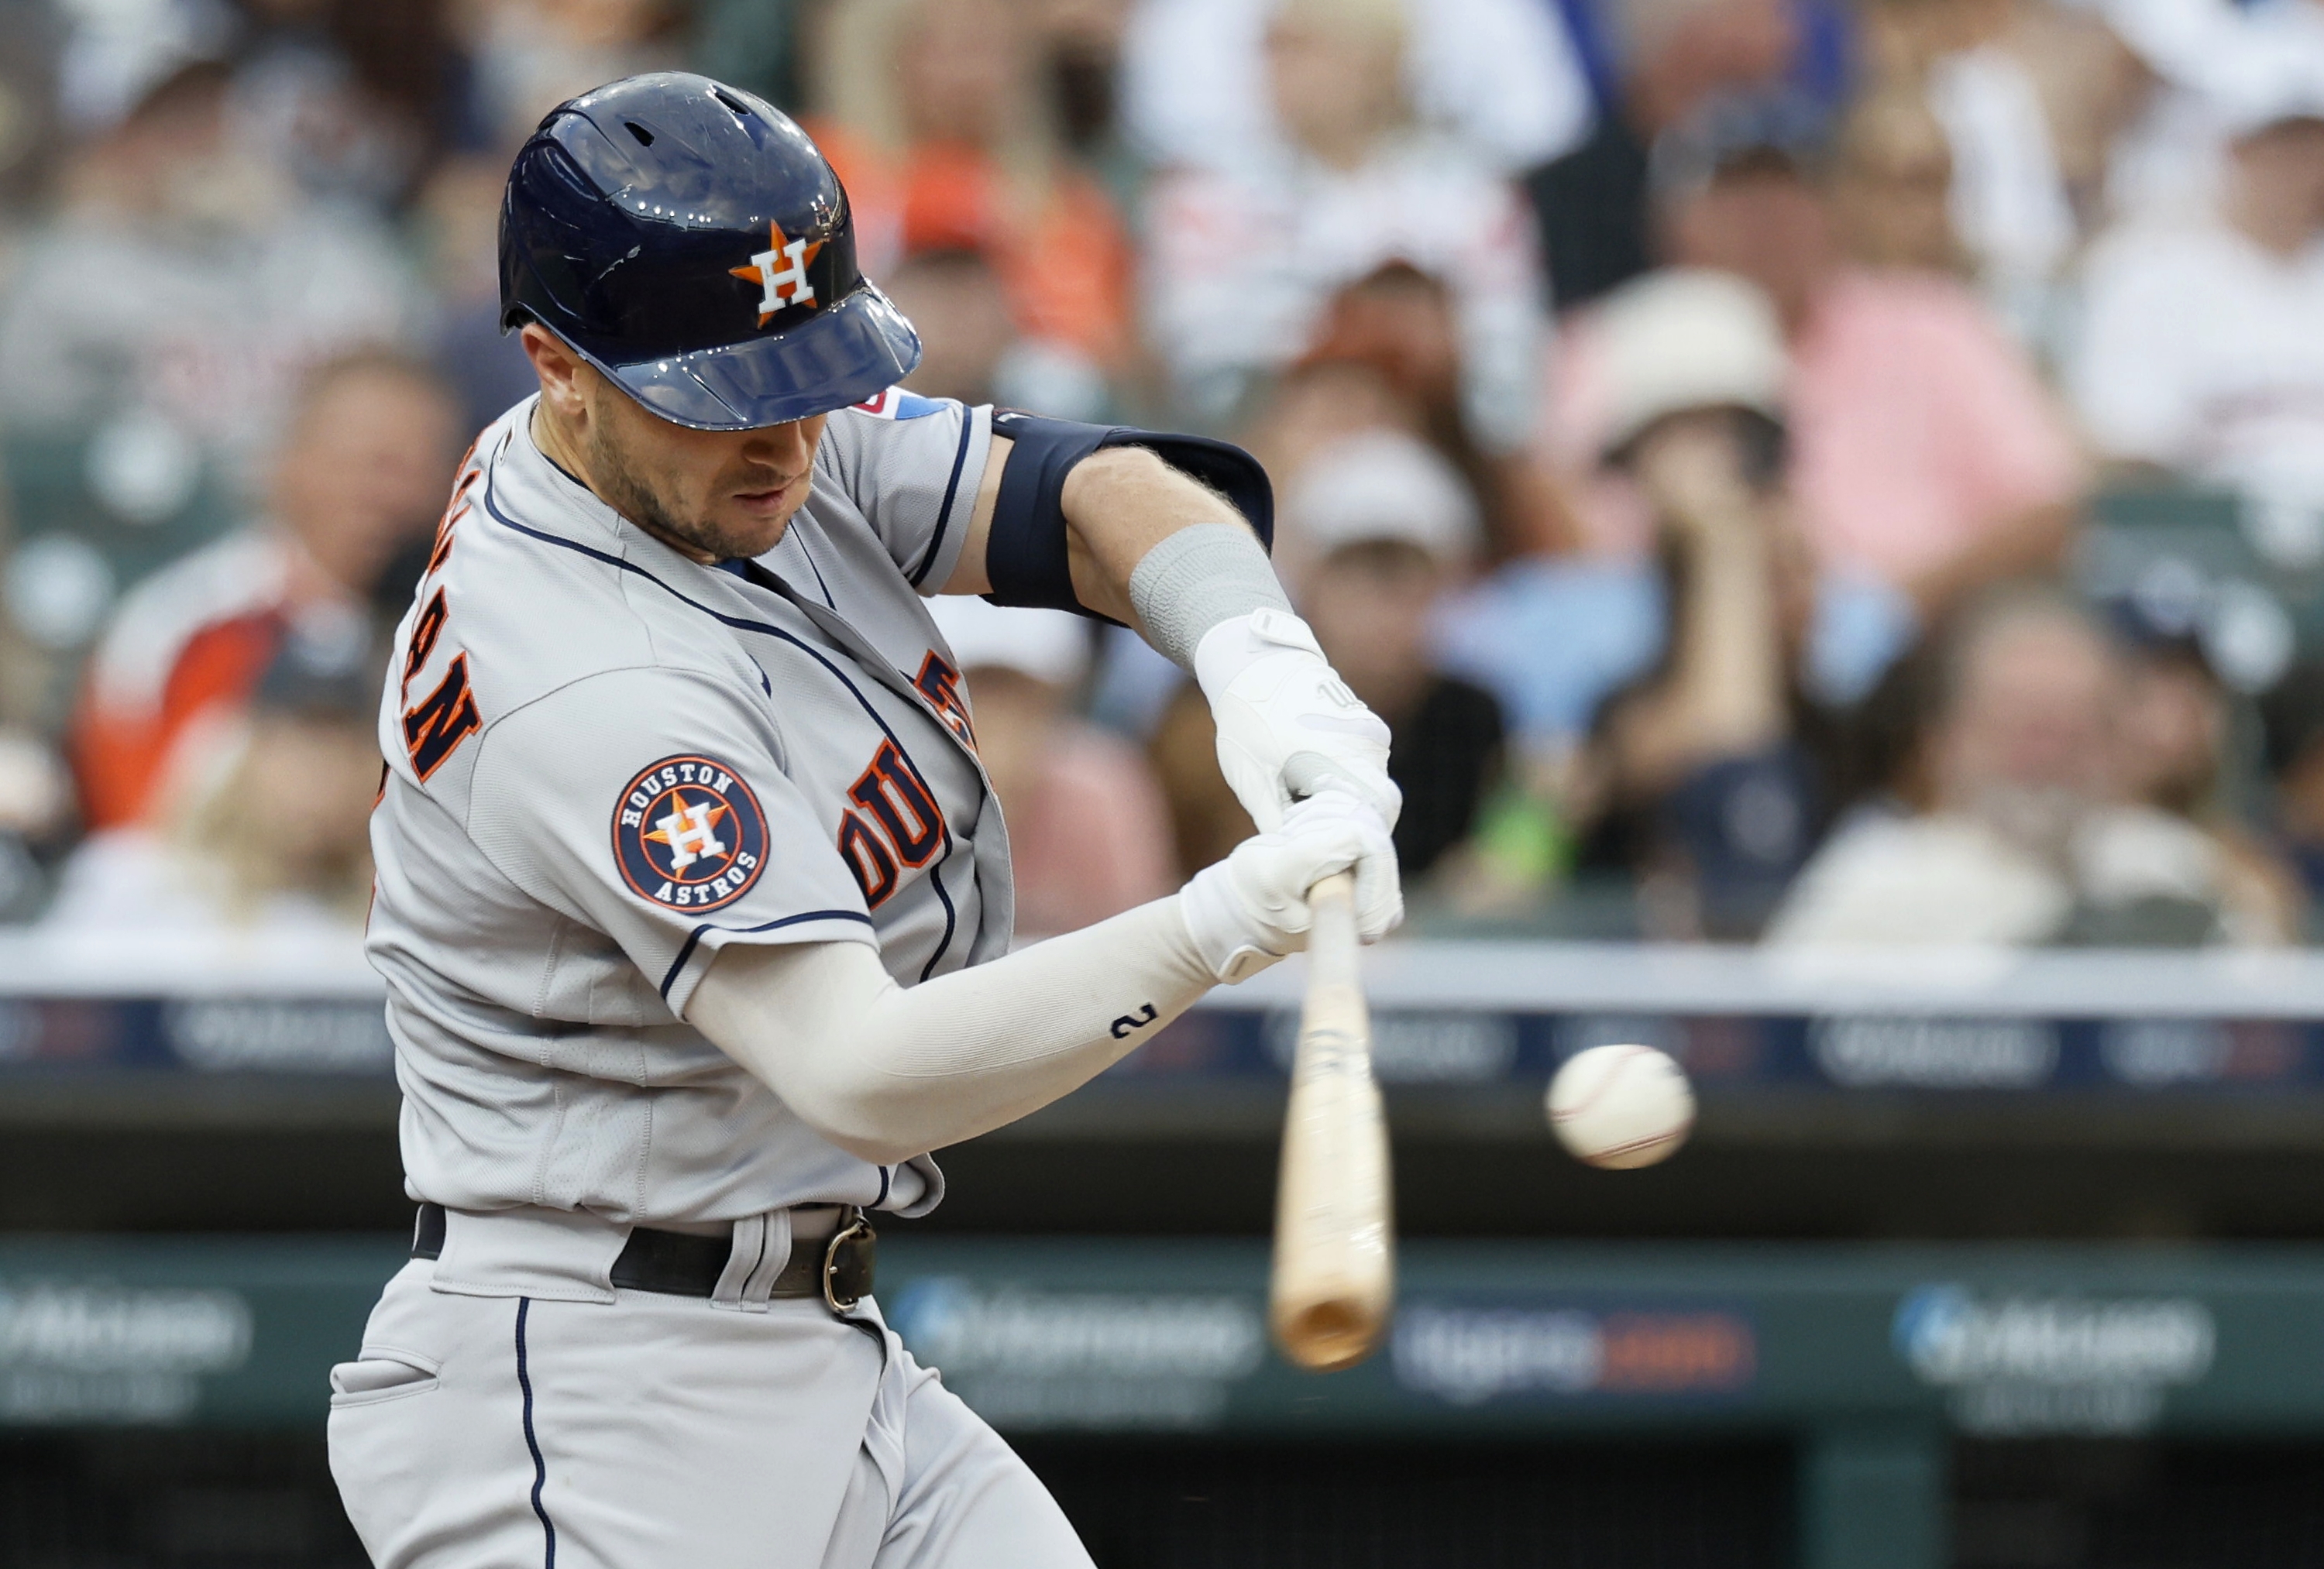 Alex Bregman drives in 4 runs to help lead the Astros to a 9-2 win